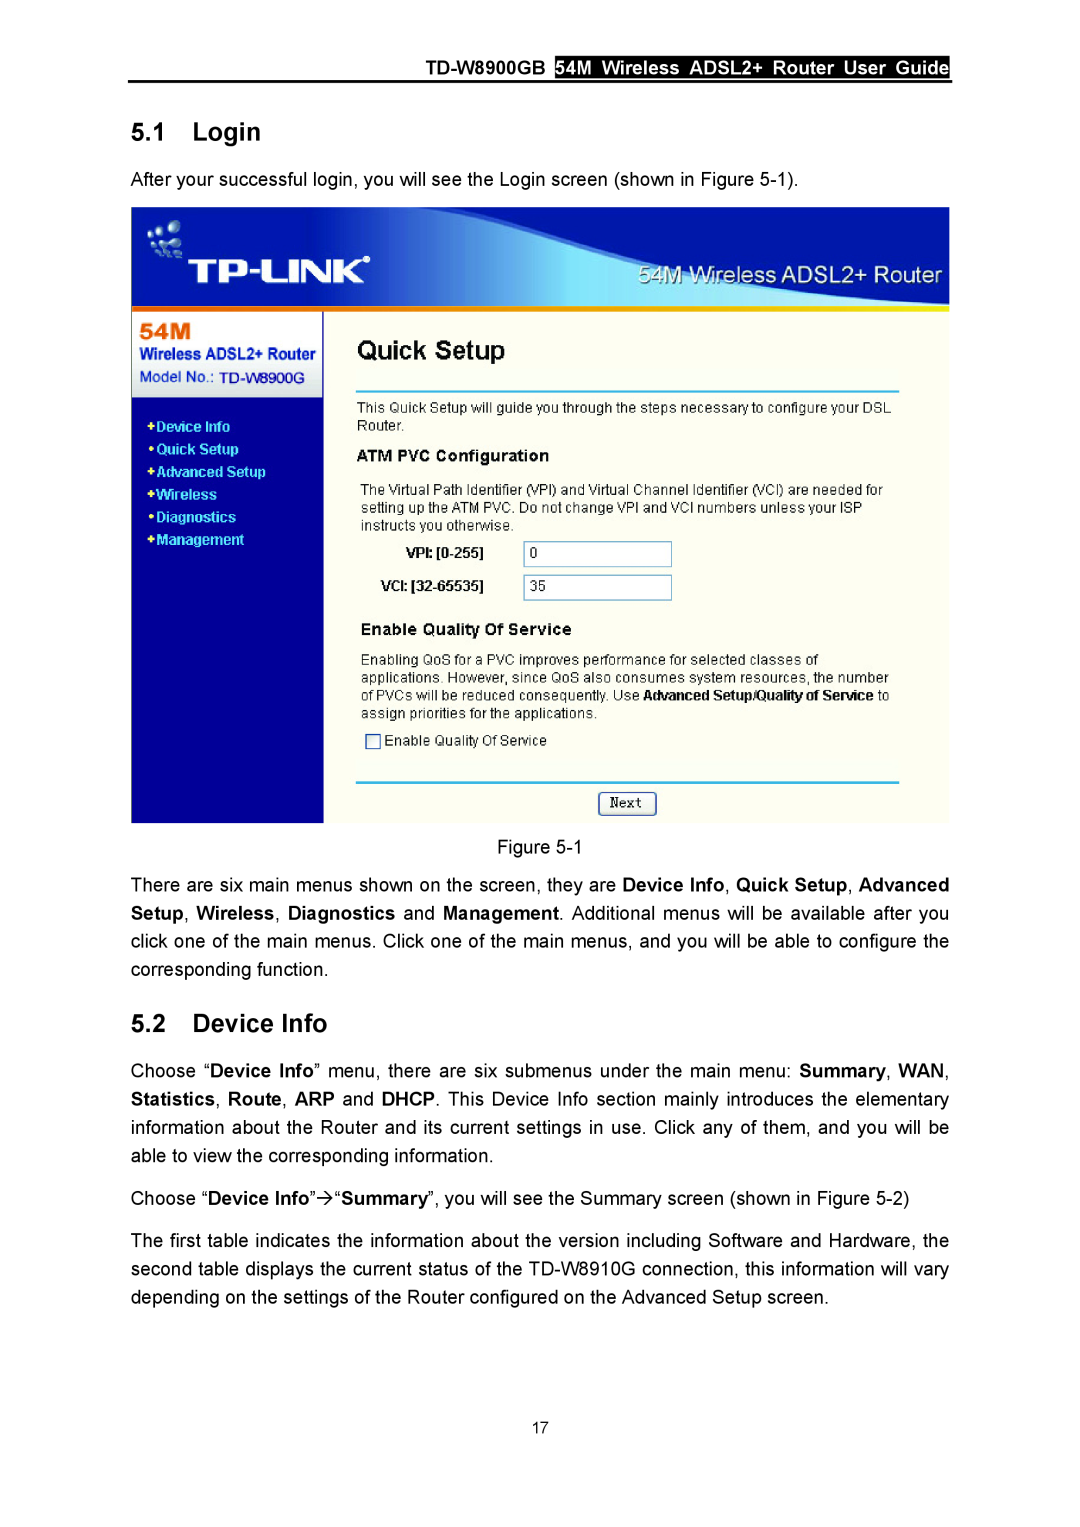 TP-Link manual Login, Device Info, TD-W8900GB 54M Wireless ADSL2+ Router User Guide 